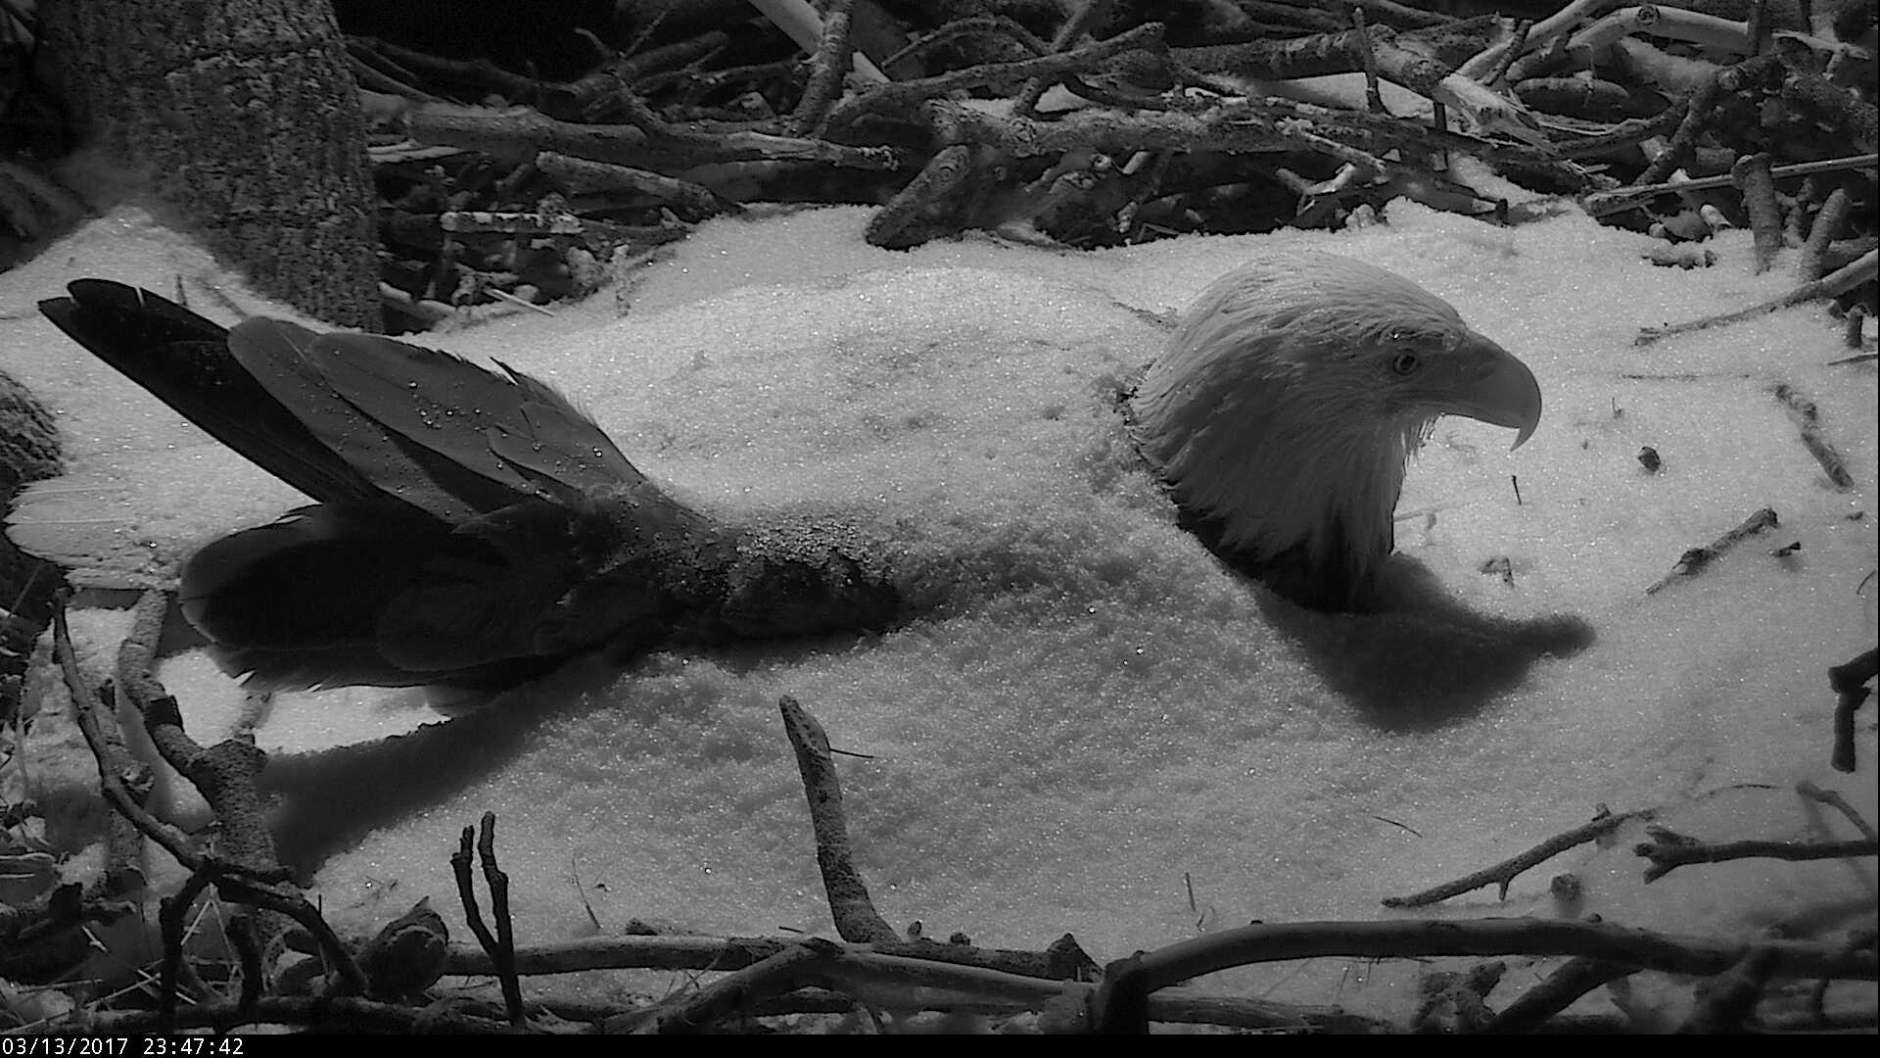 The First Lady kept watch over her eggs overnight from March 13 to March 14, 2017 at the National Arboretum as a wintry mix moved through the D.C. region.  (© 2017 American Eagle Foundation, DCEAGLECAM.ORG)